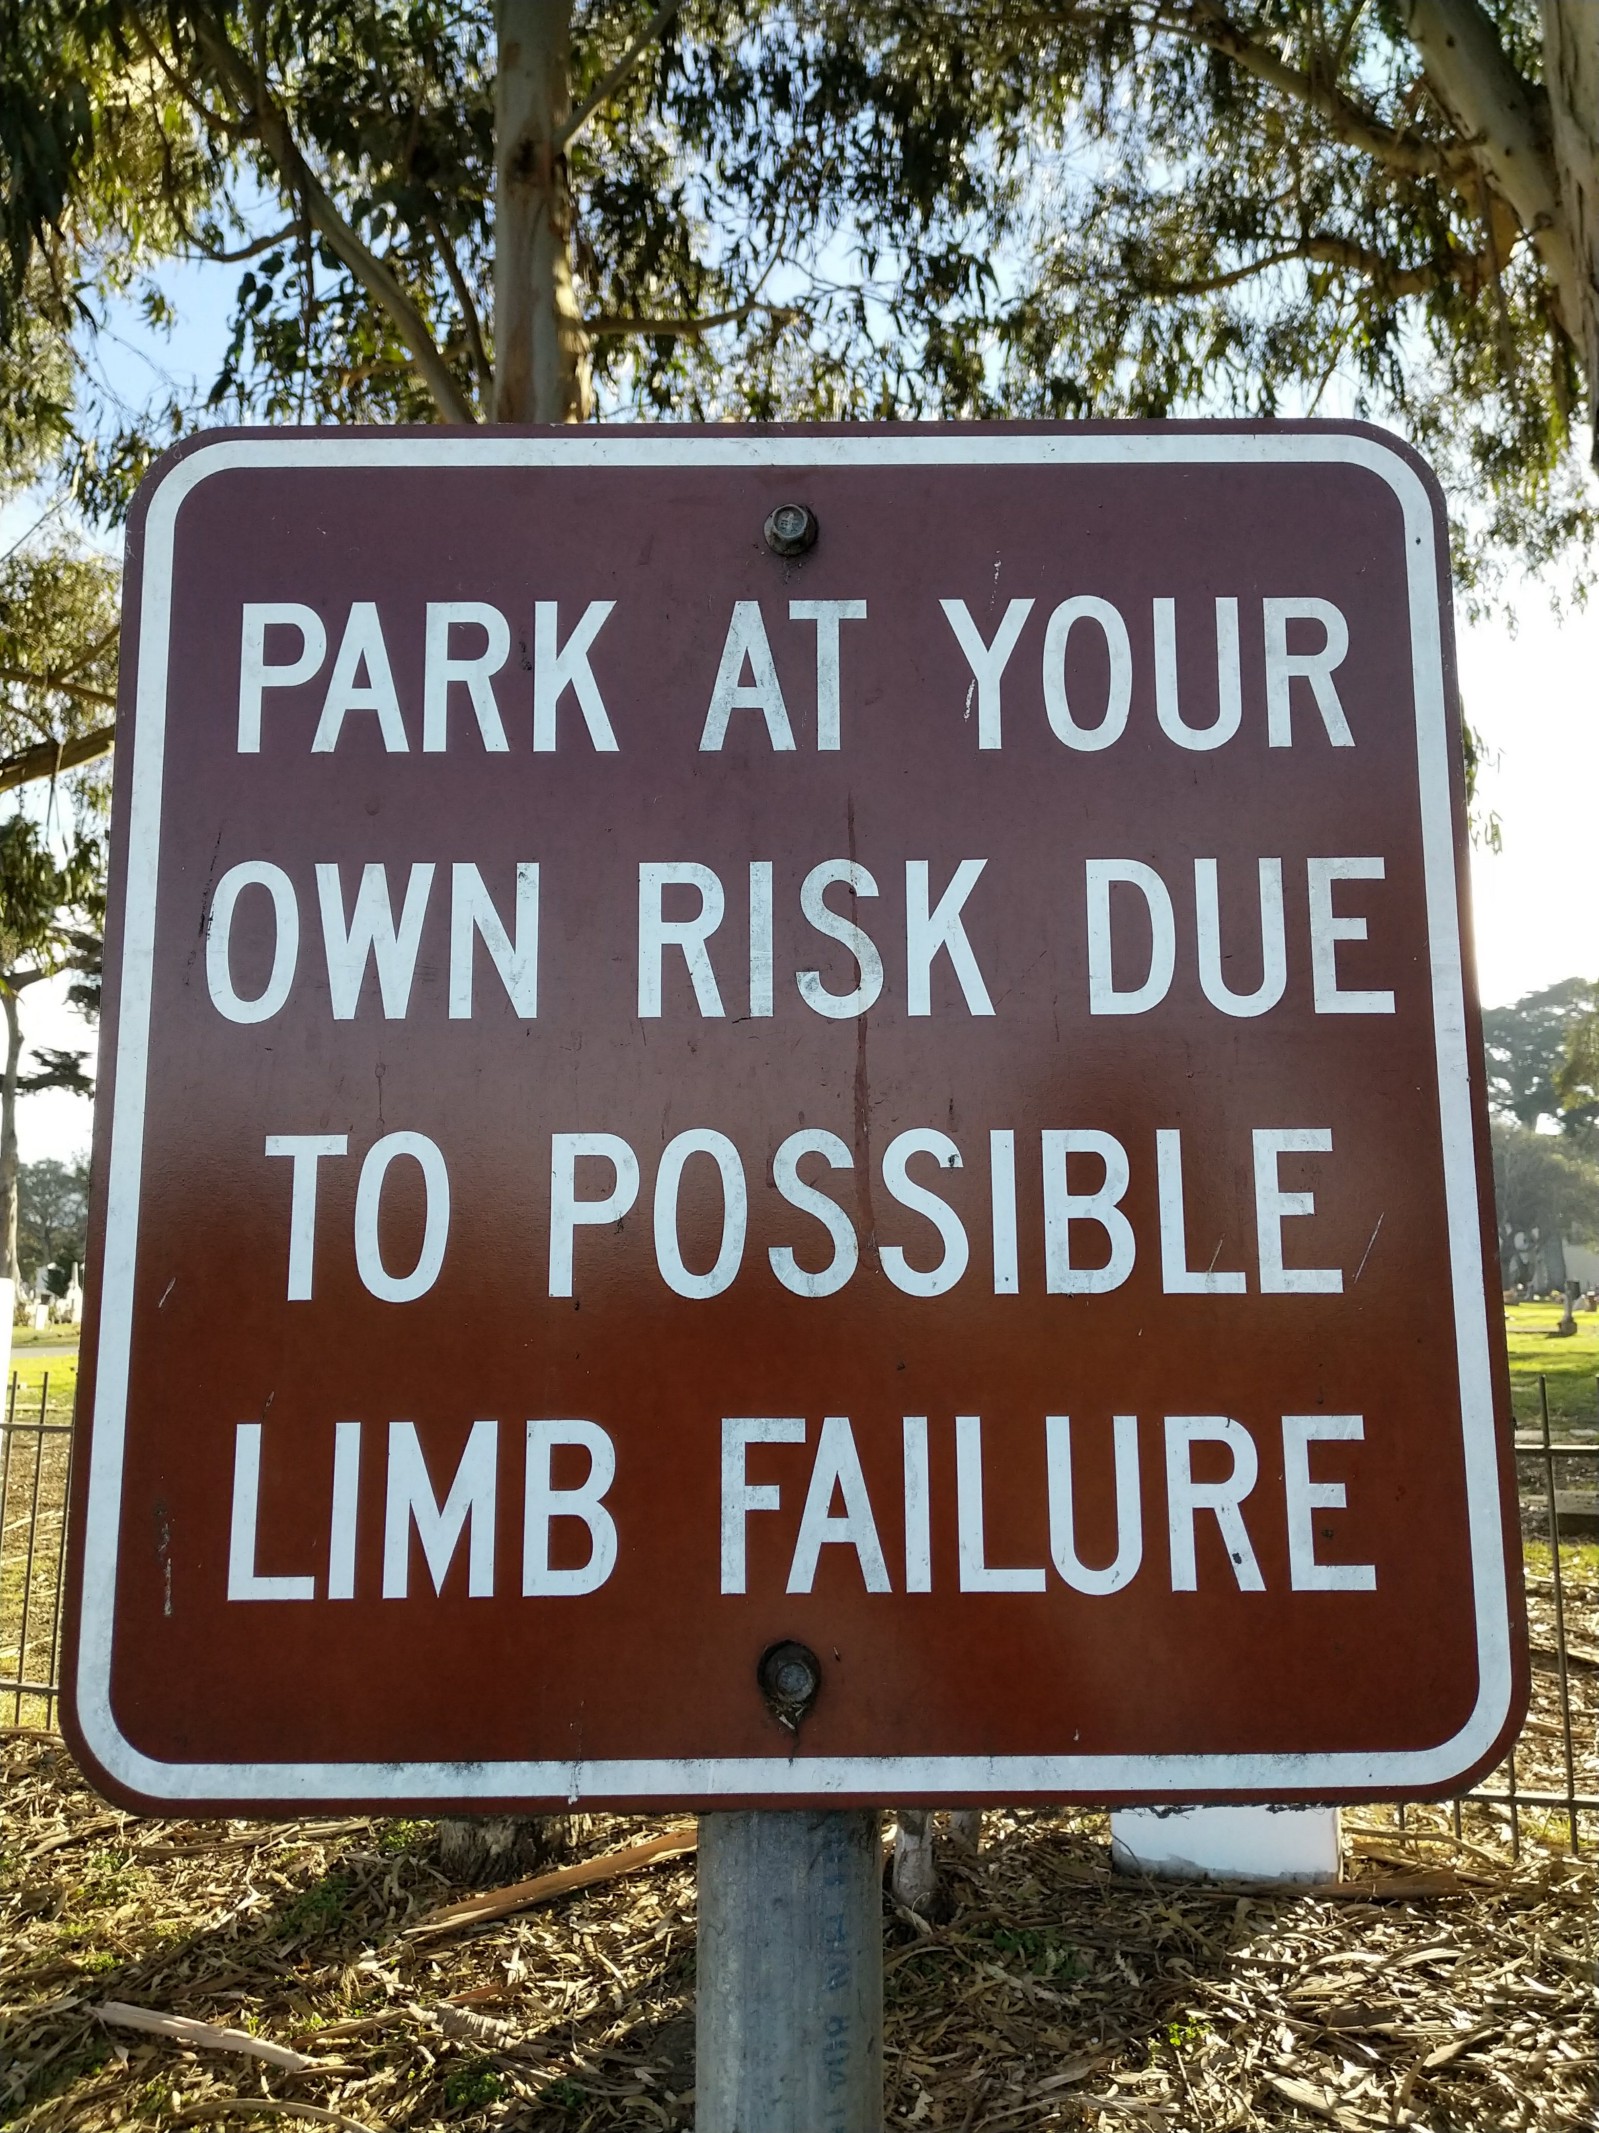 ambiguous or ridiculous warnings